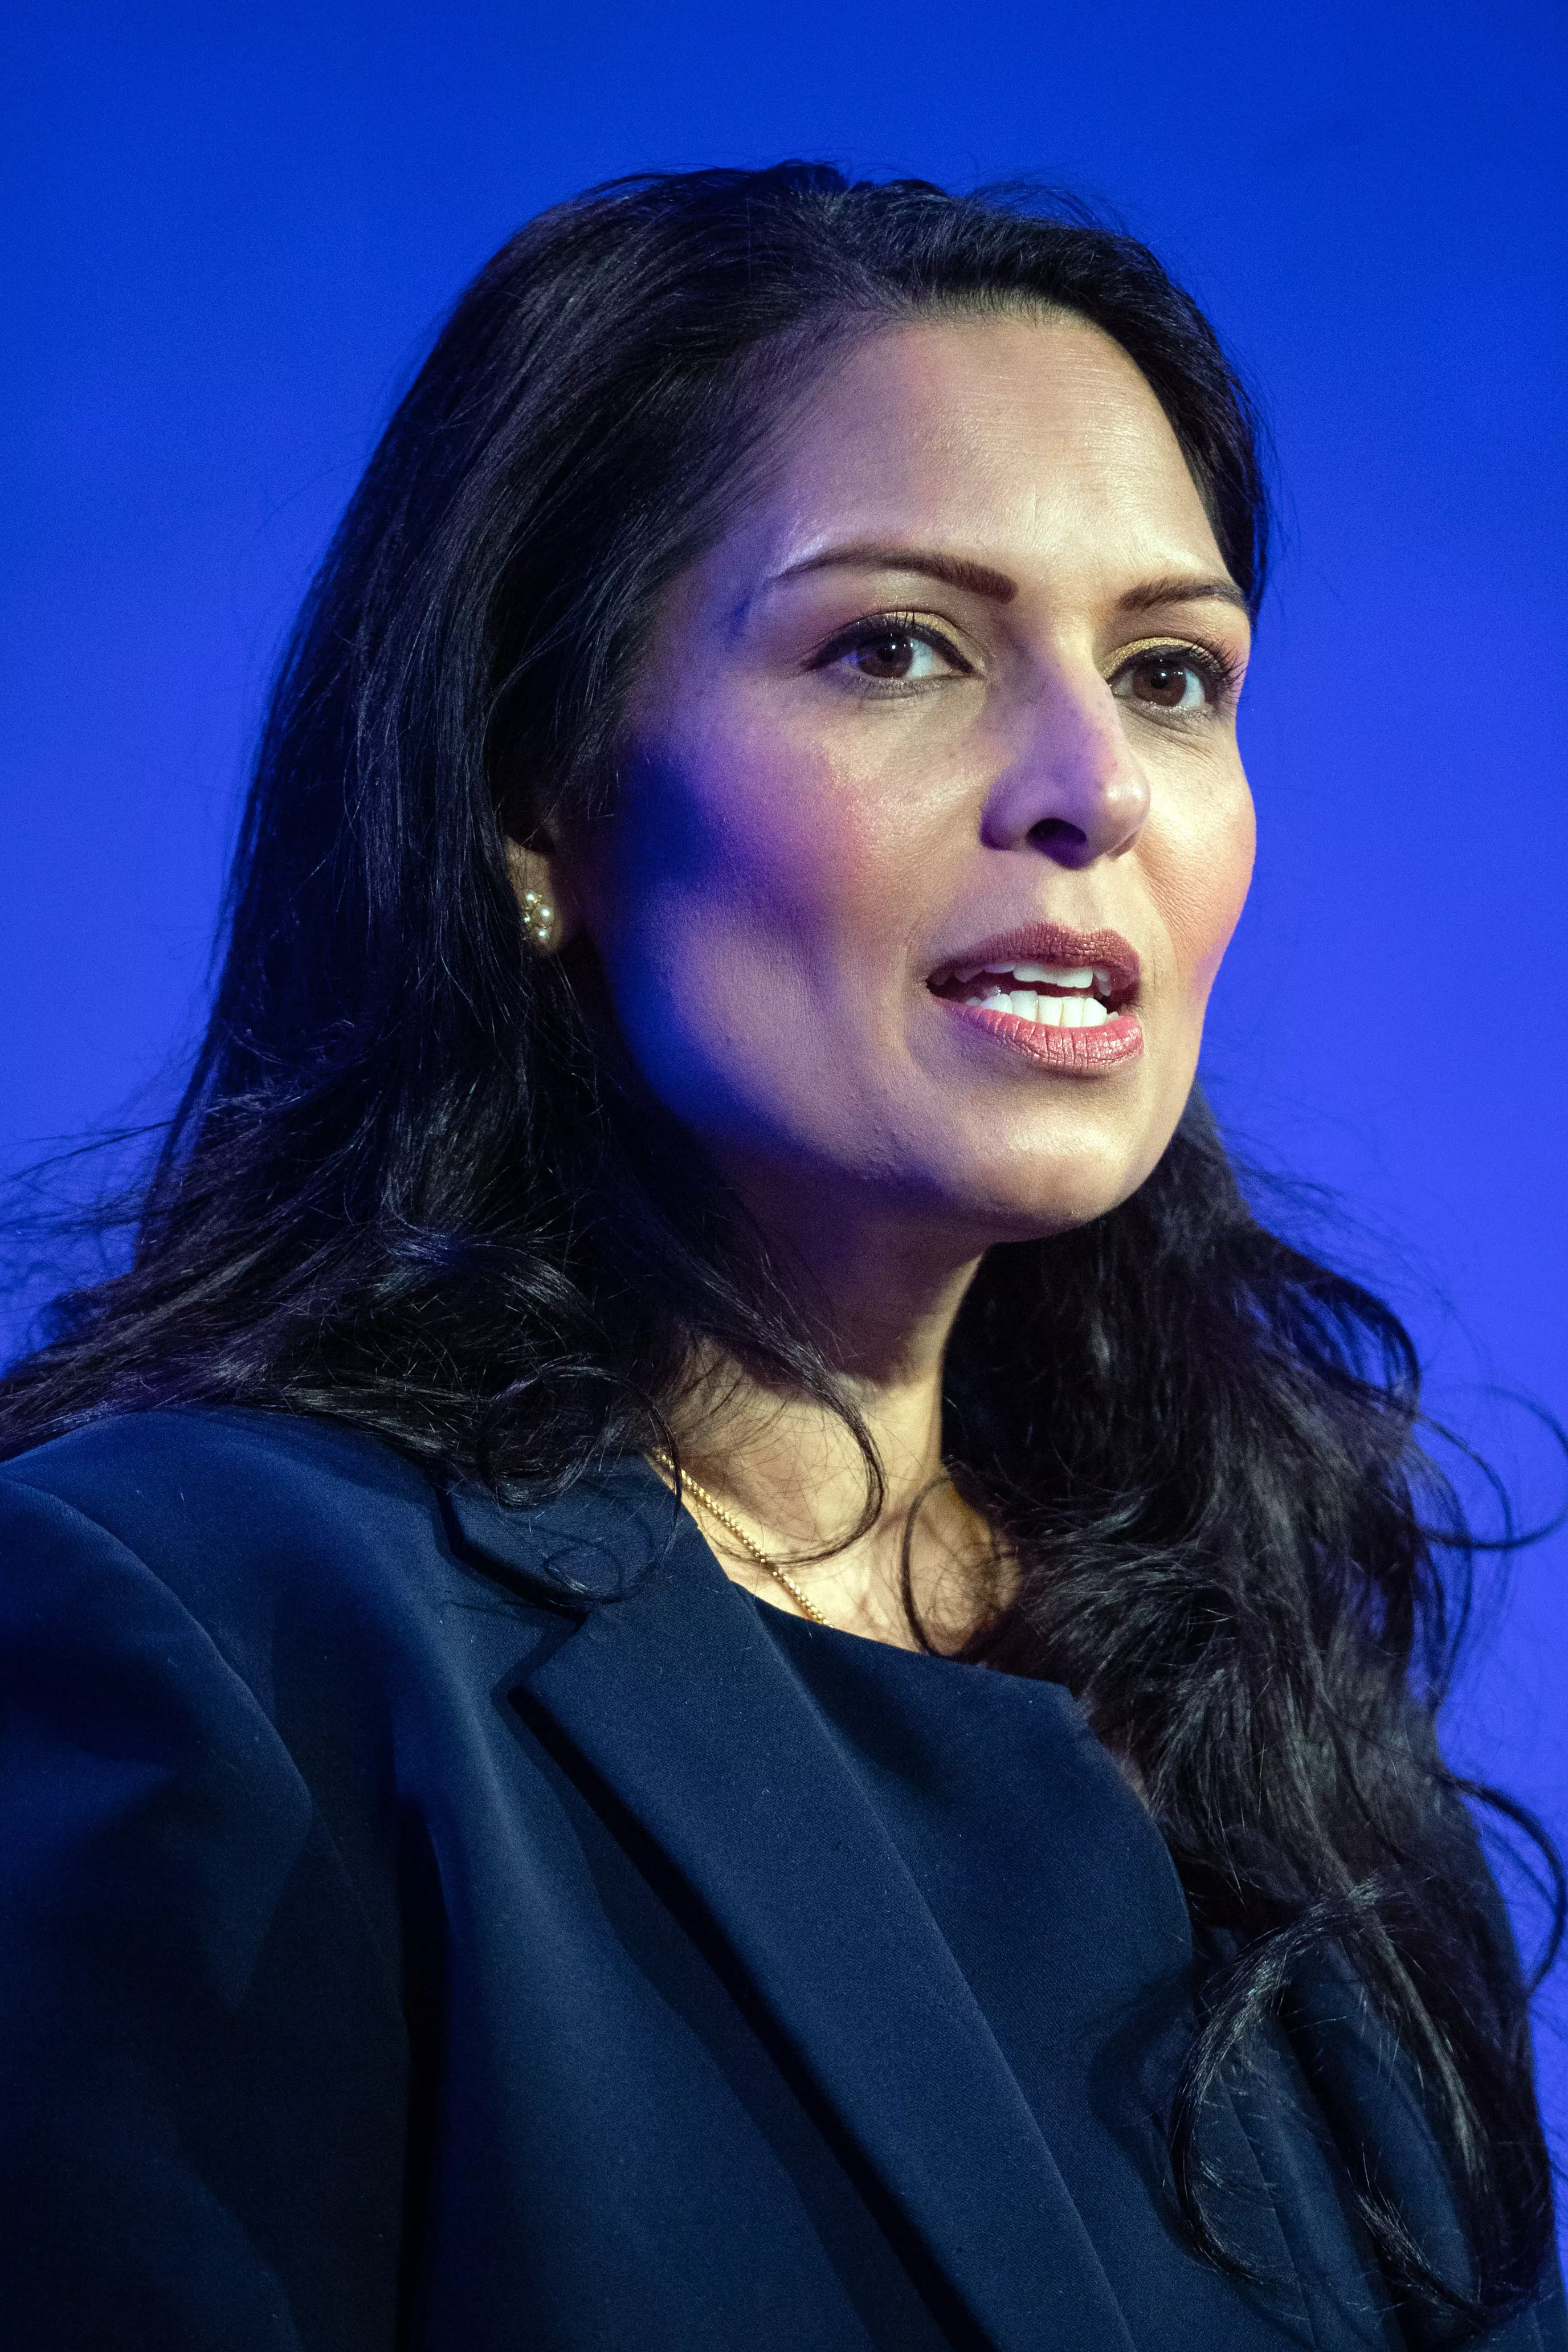 Home Secretary, Priti Patel, has been criticised for her dealing of the 'refugee crisis'.